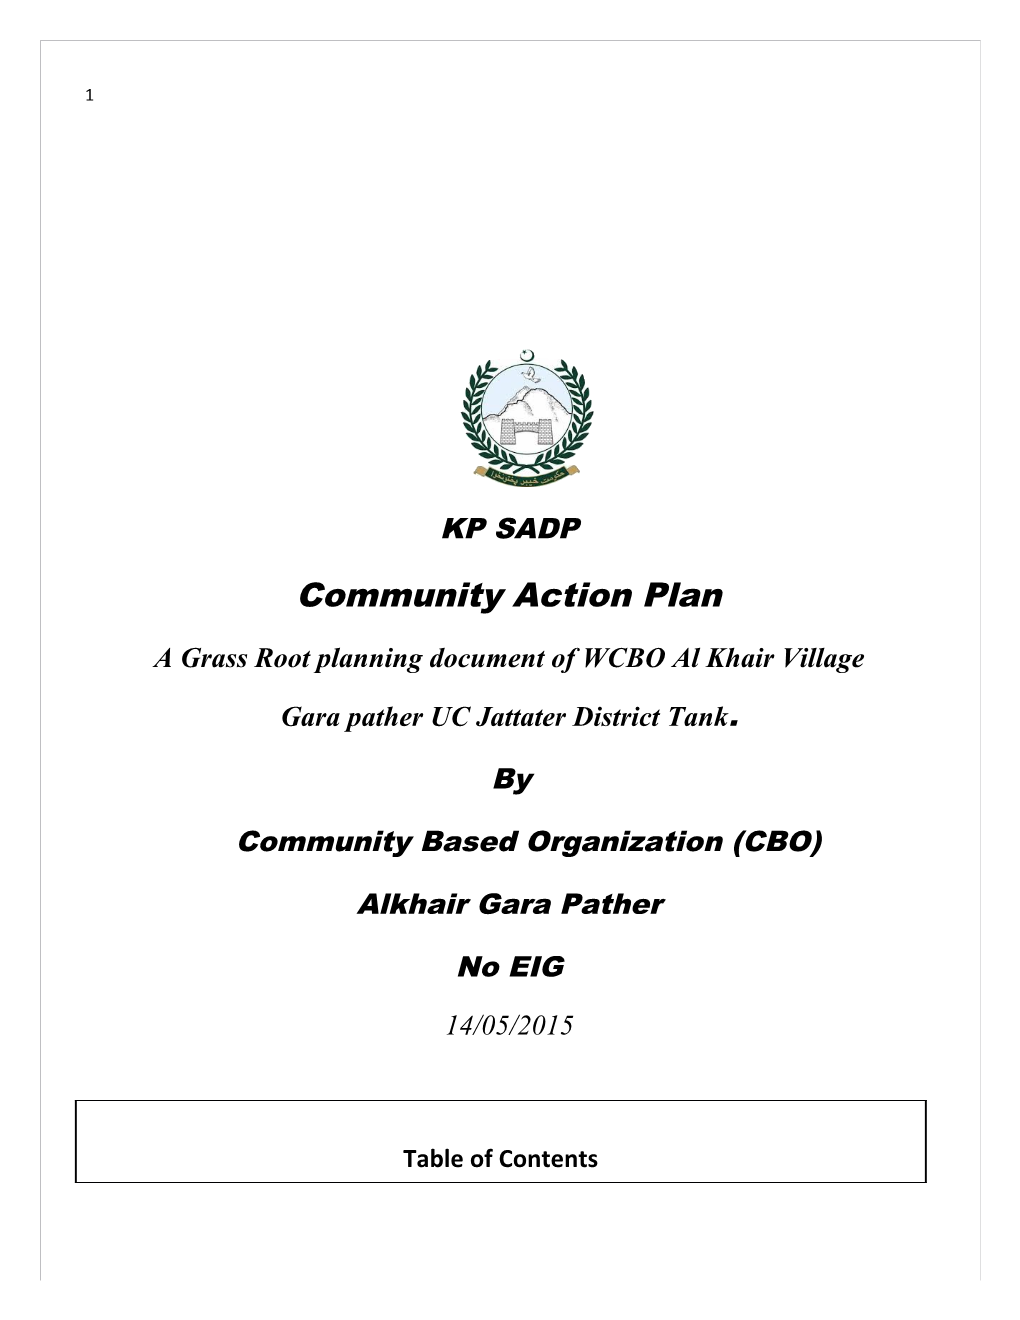 A Grass Root Planning Document of WCBO Al Khairvillage